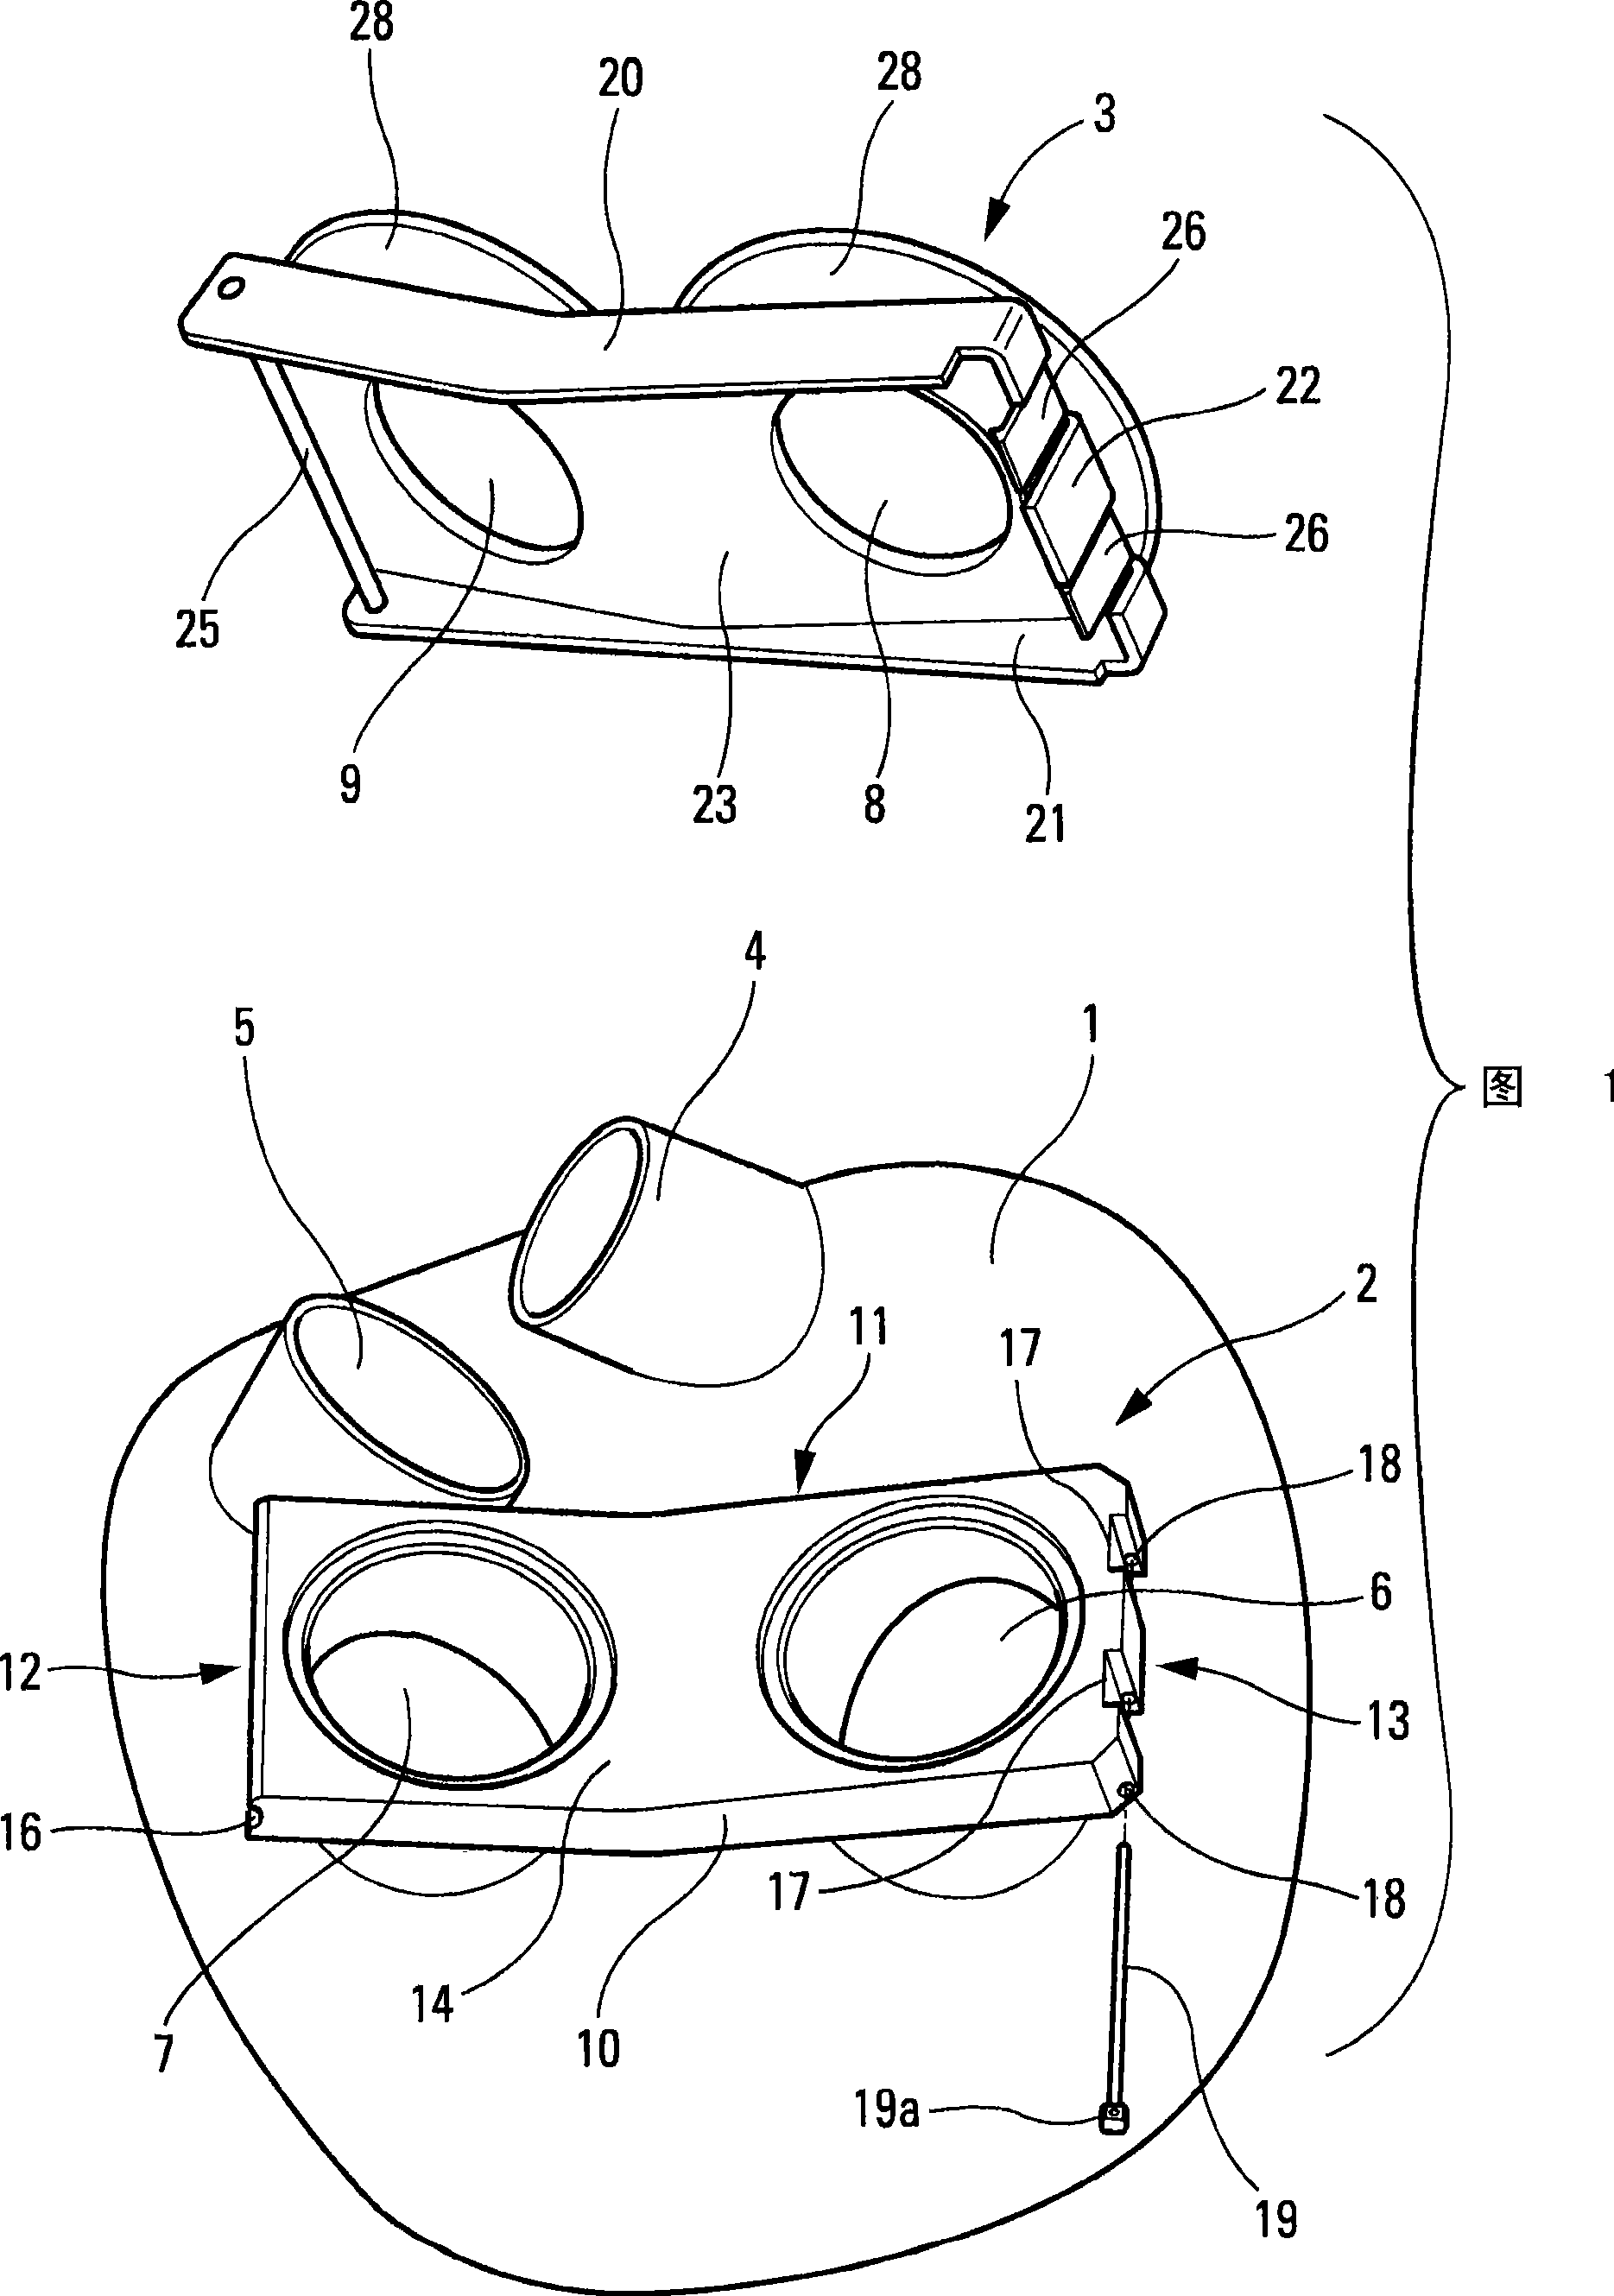 Device for rapid connection between a totally implantable heart prosthesis and natural auricles